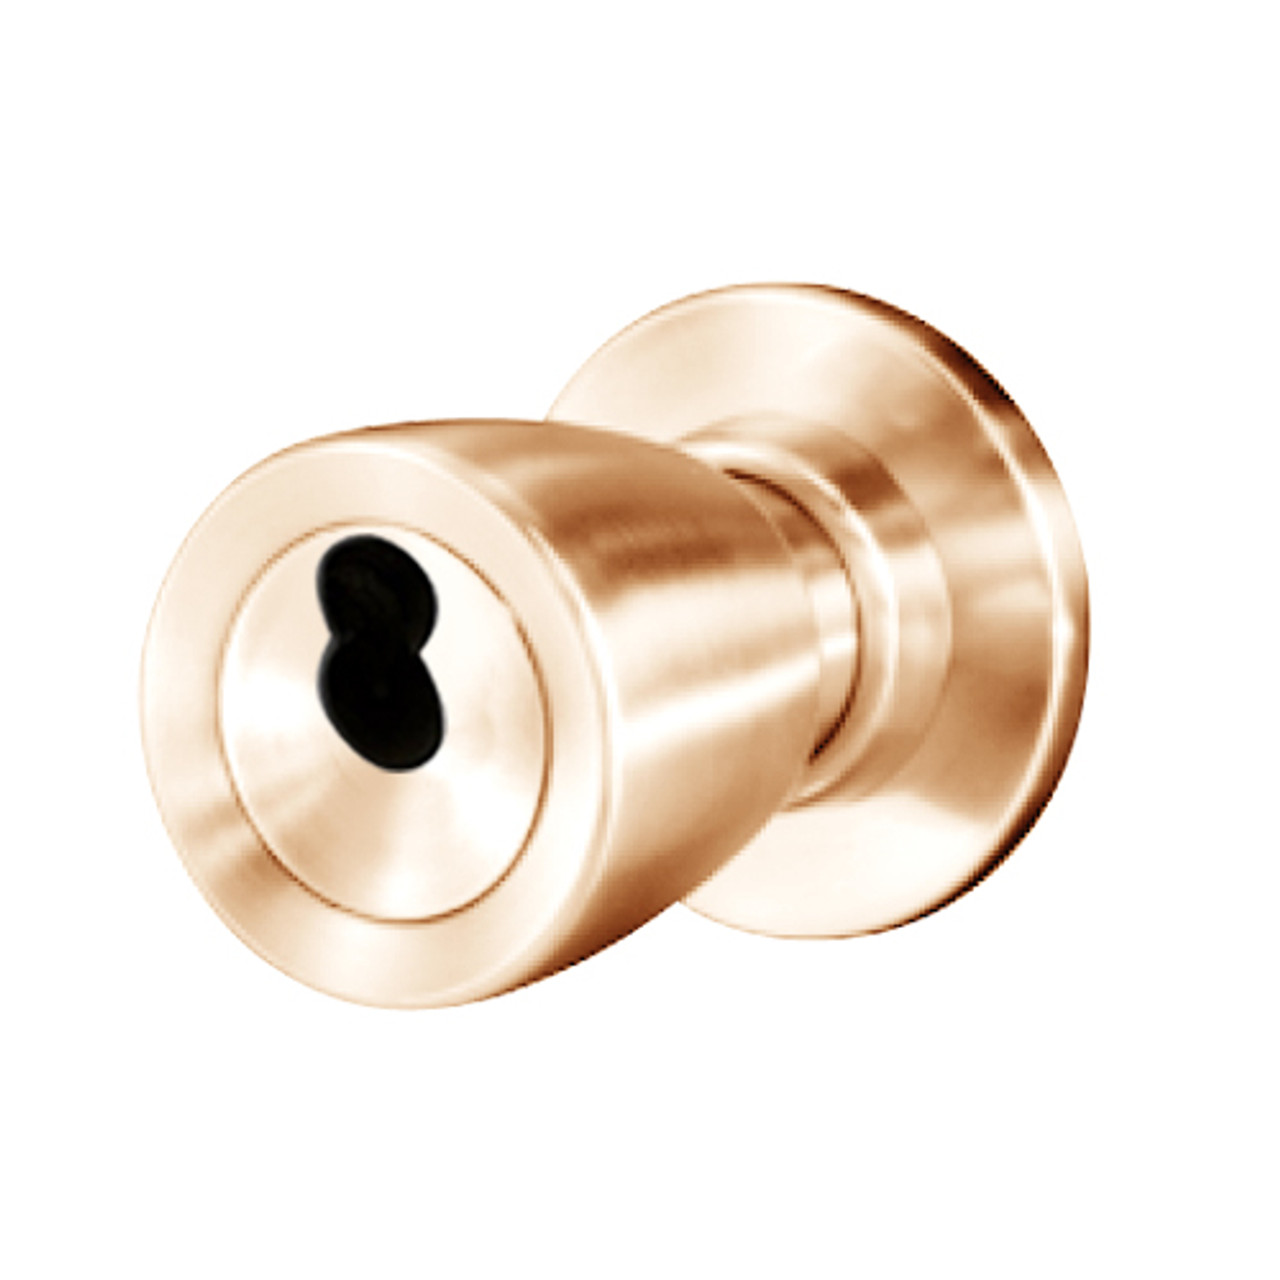 8K37XR6CSTK611 Best 8K Series Special Heavy Duty Cylindrical Knob Locks with Tulip Style in Bright Bronze